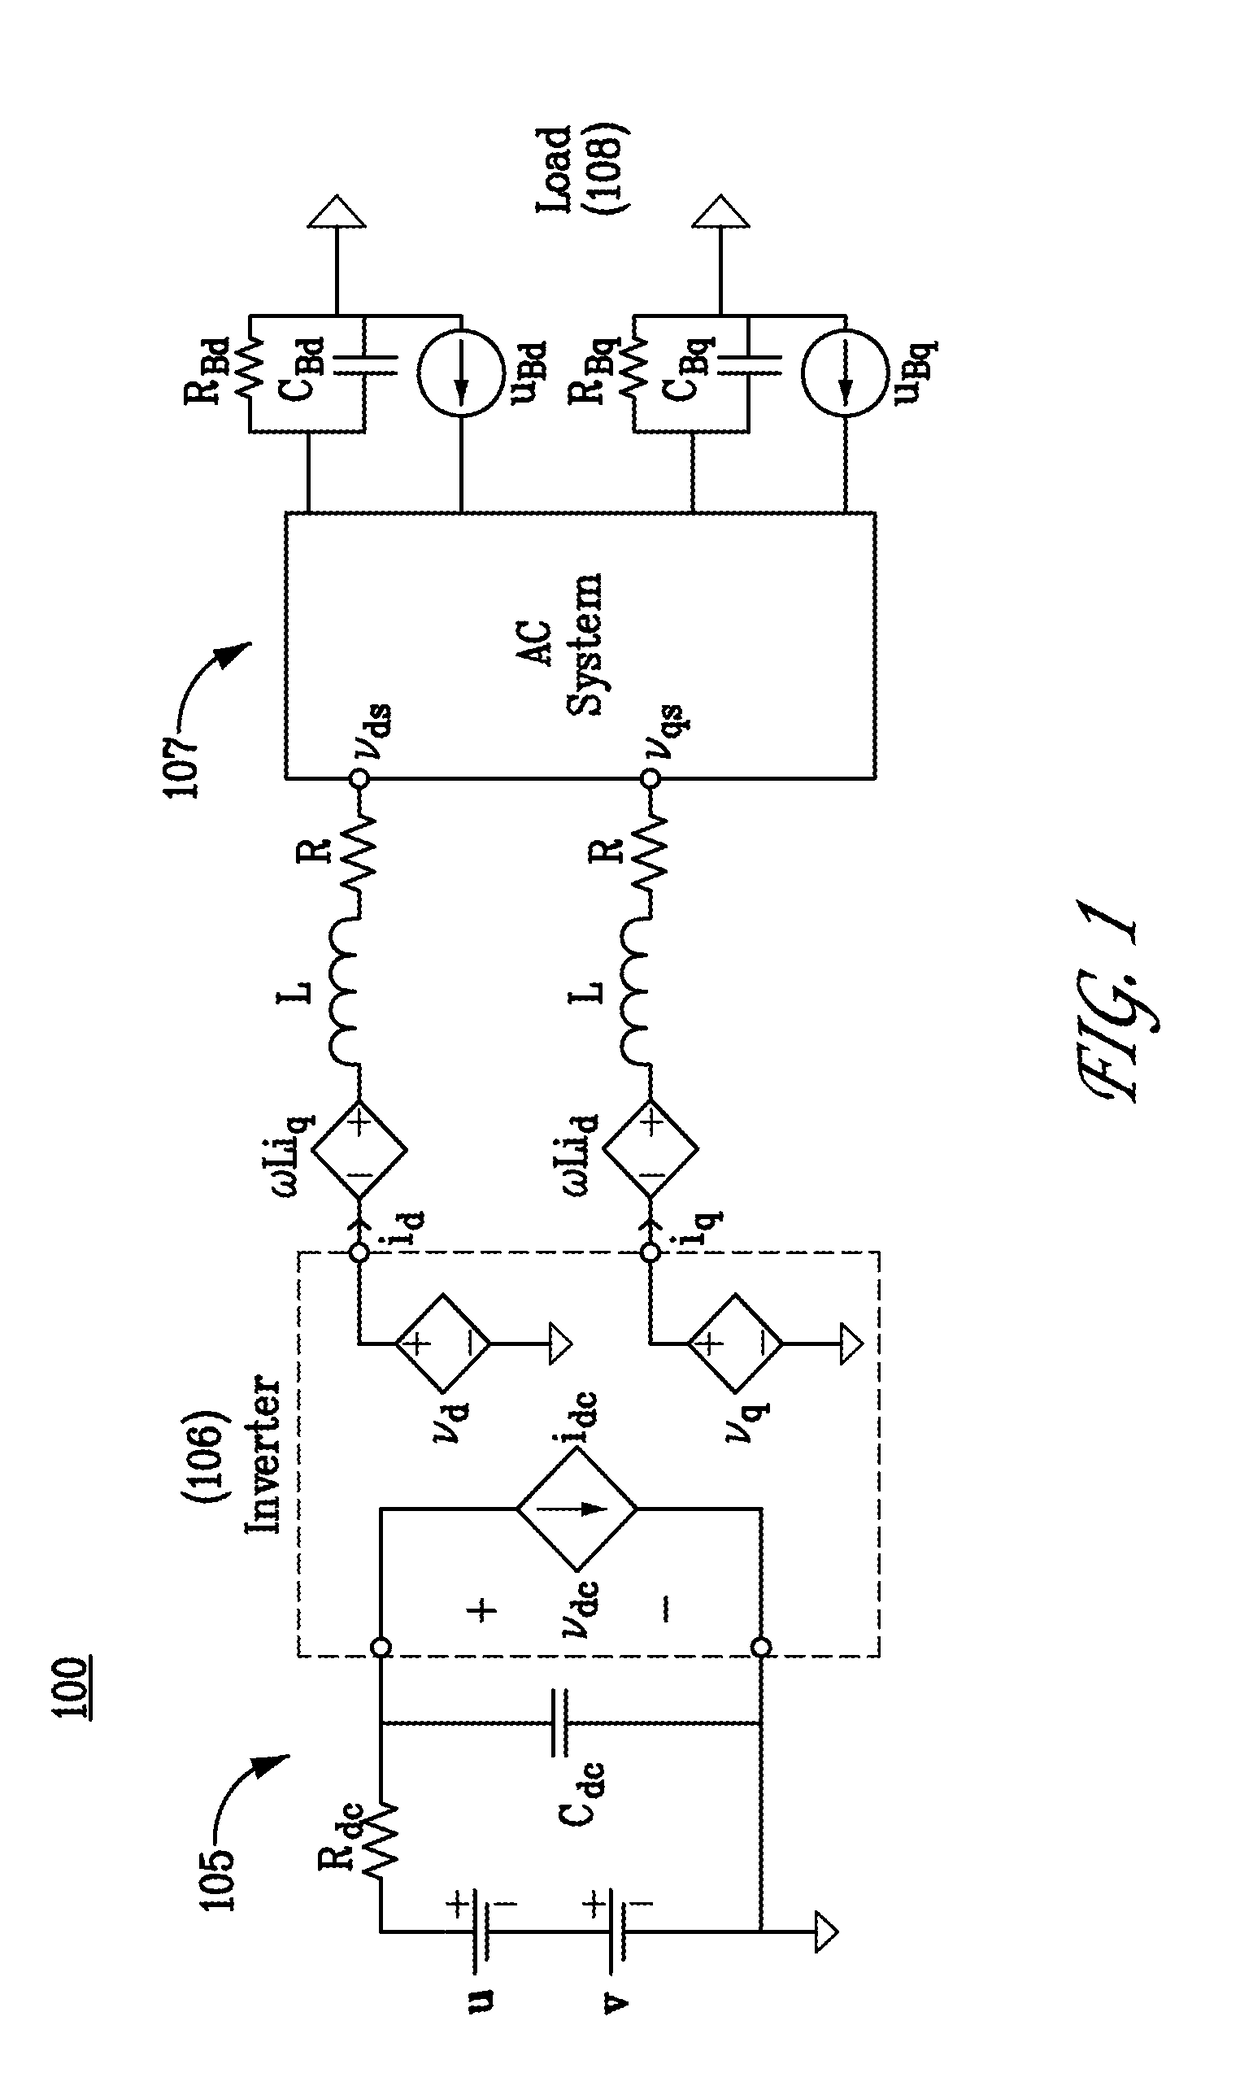 Nonlinear power flow control for networked AC/DC microgrids